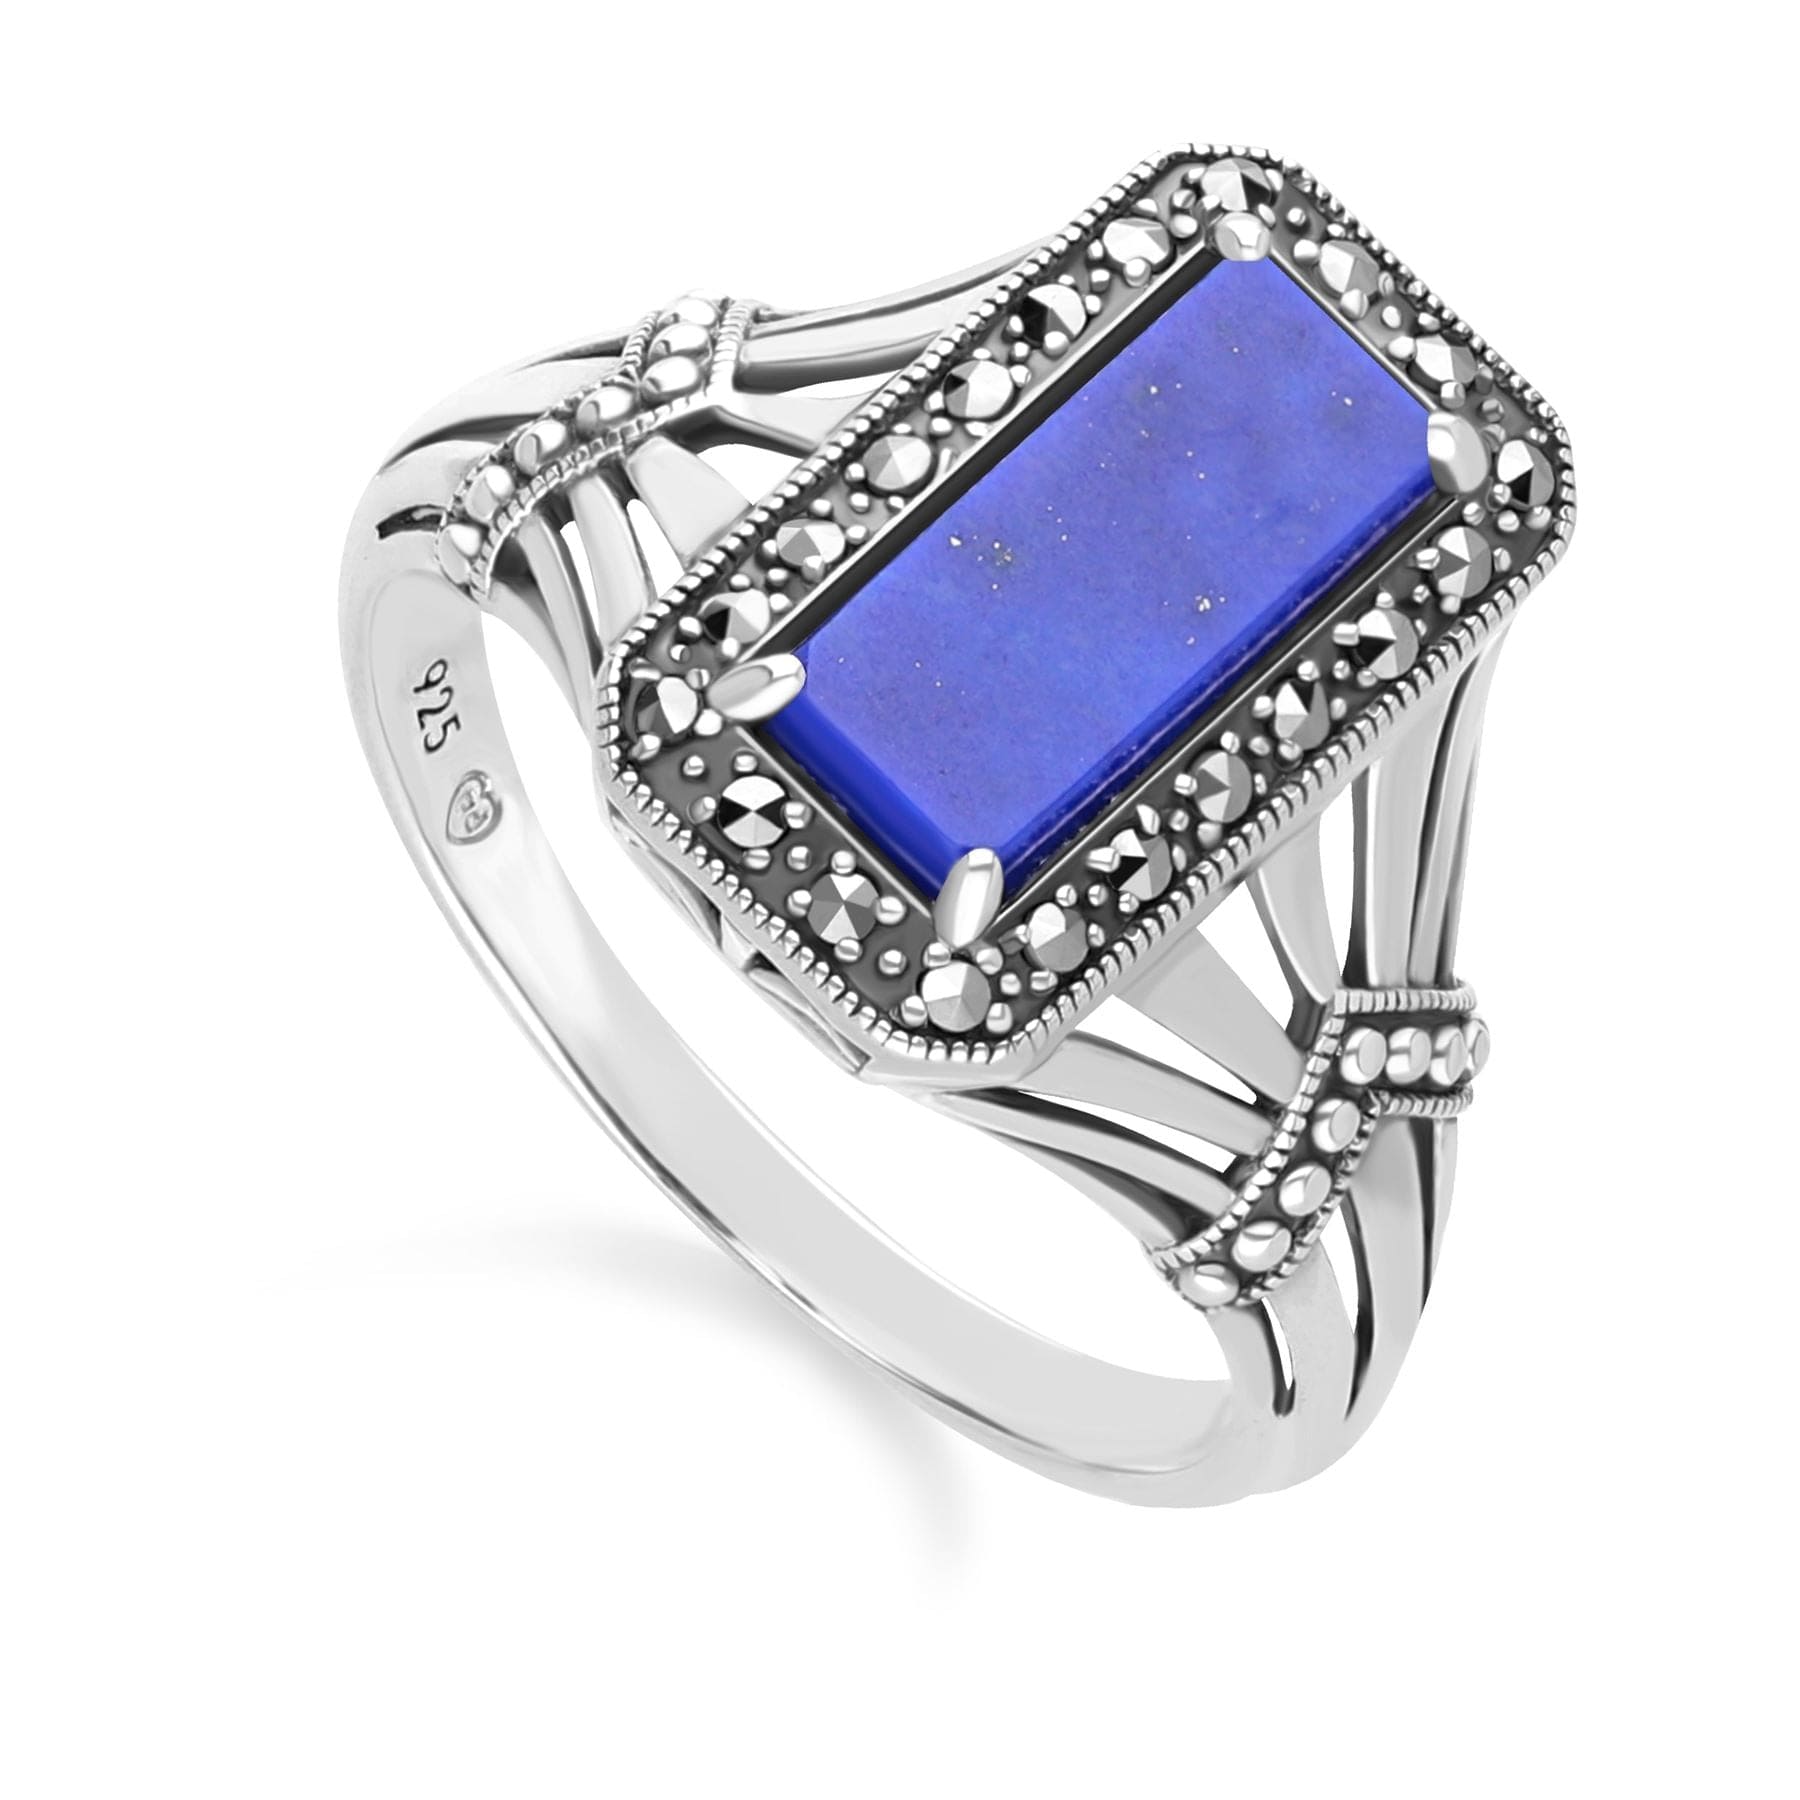 Art Deco Style Octagon Lapis Lazuli and Marcasite Ring in Sterling Silver 214R642002925 Side